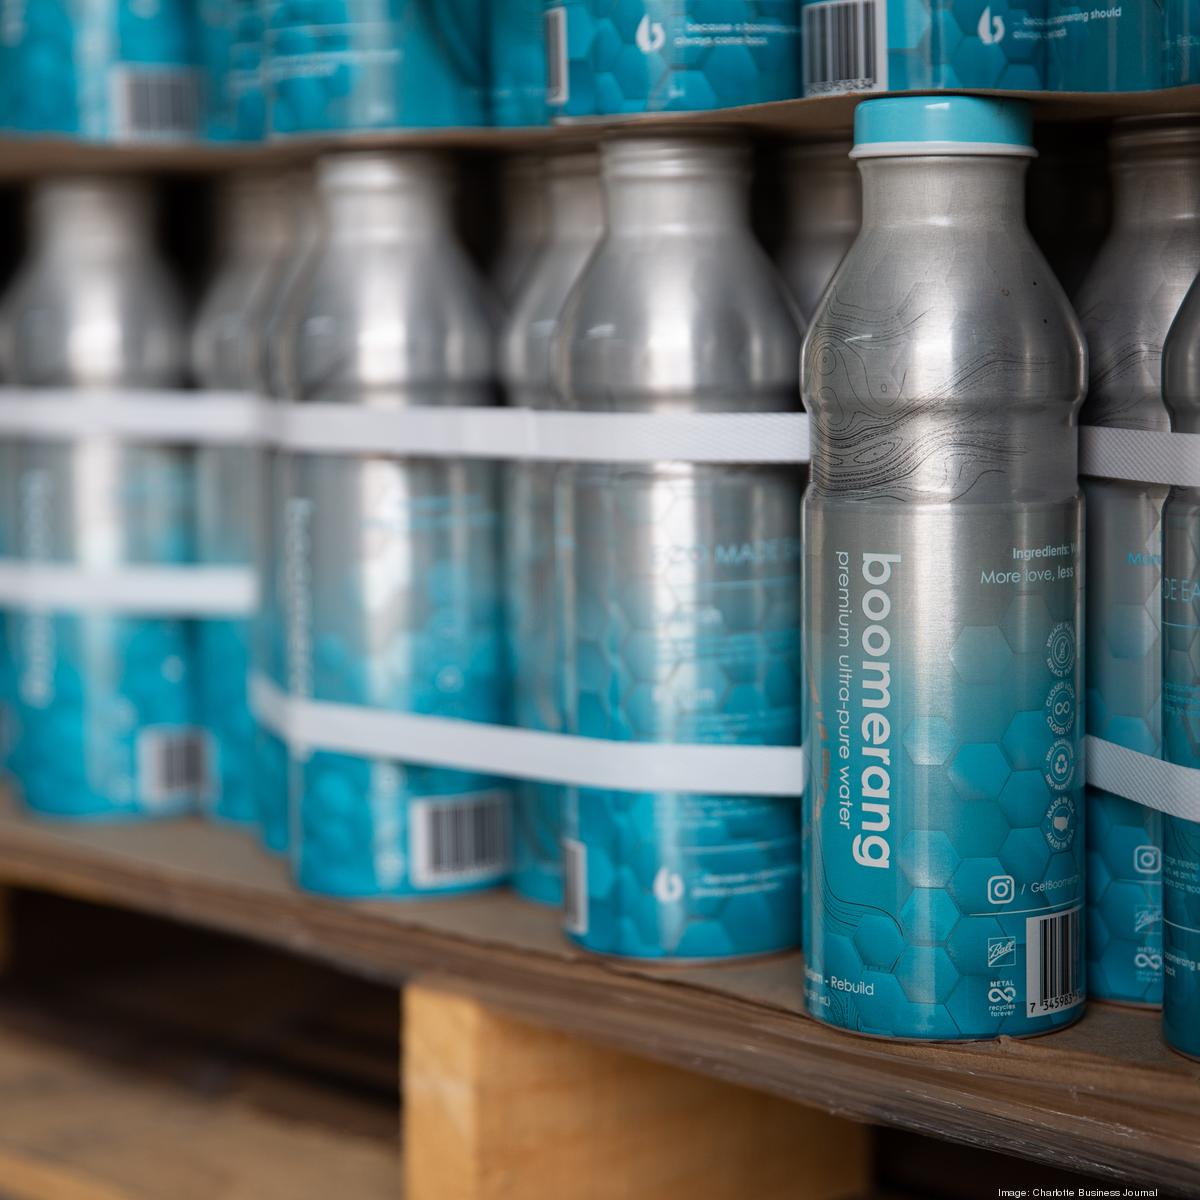 Charlotte Inno - Davidson startup Boomerang Water, Ball Corp. partner to  provide sustainable water bottles